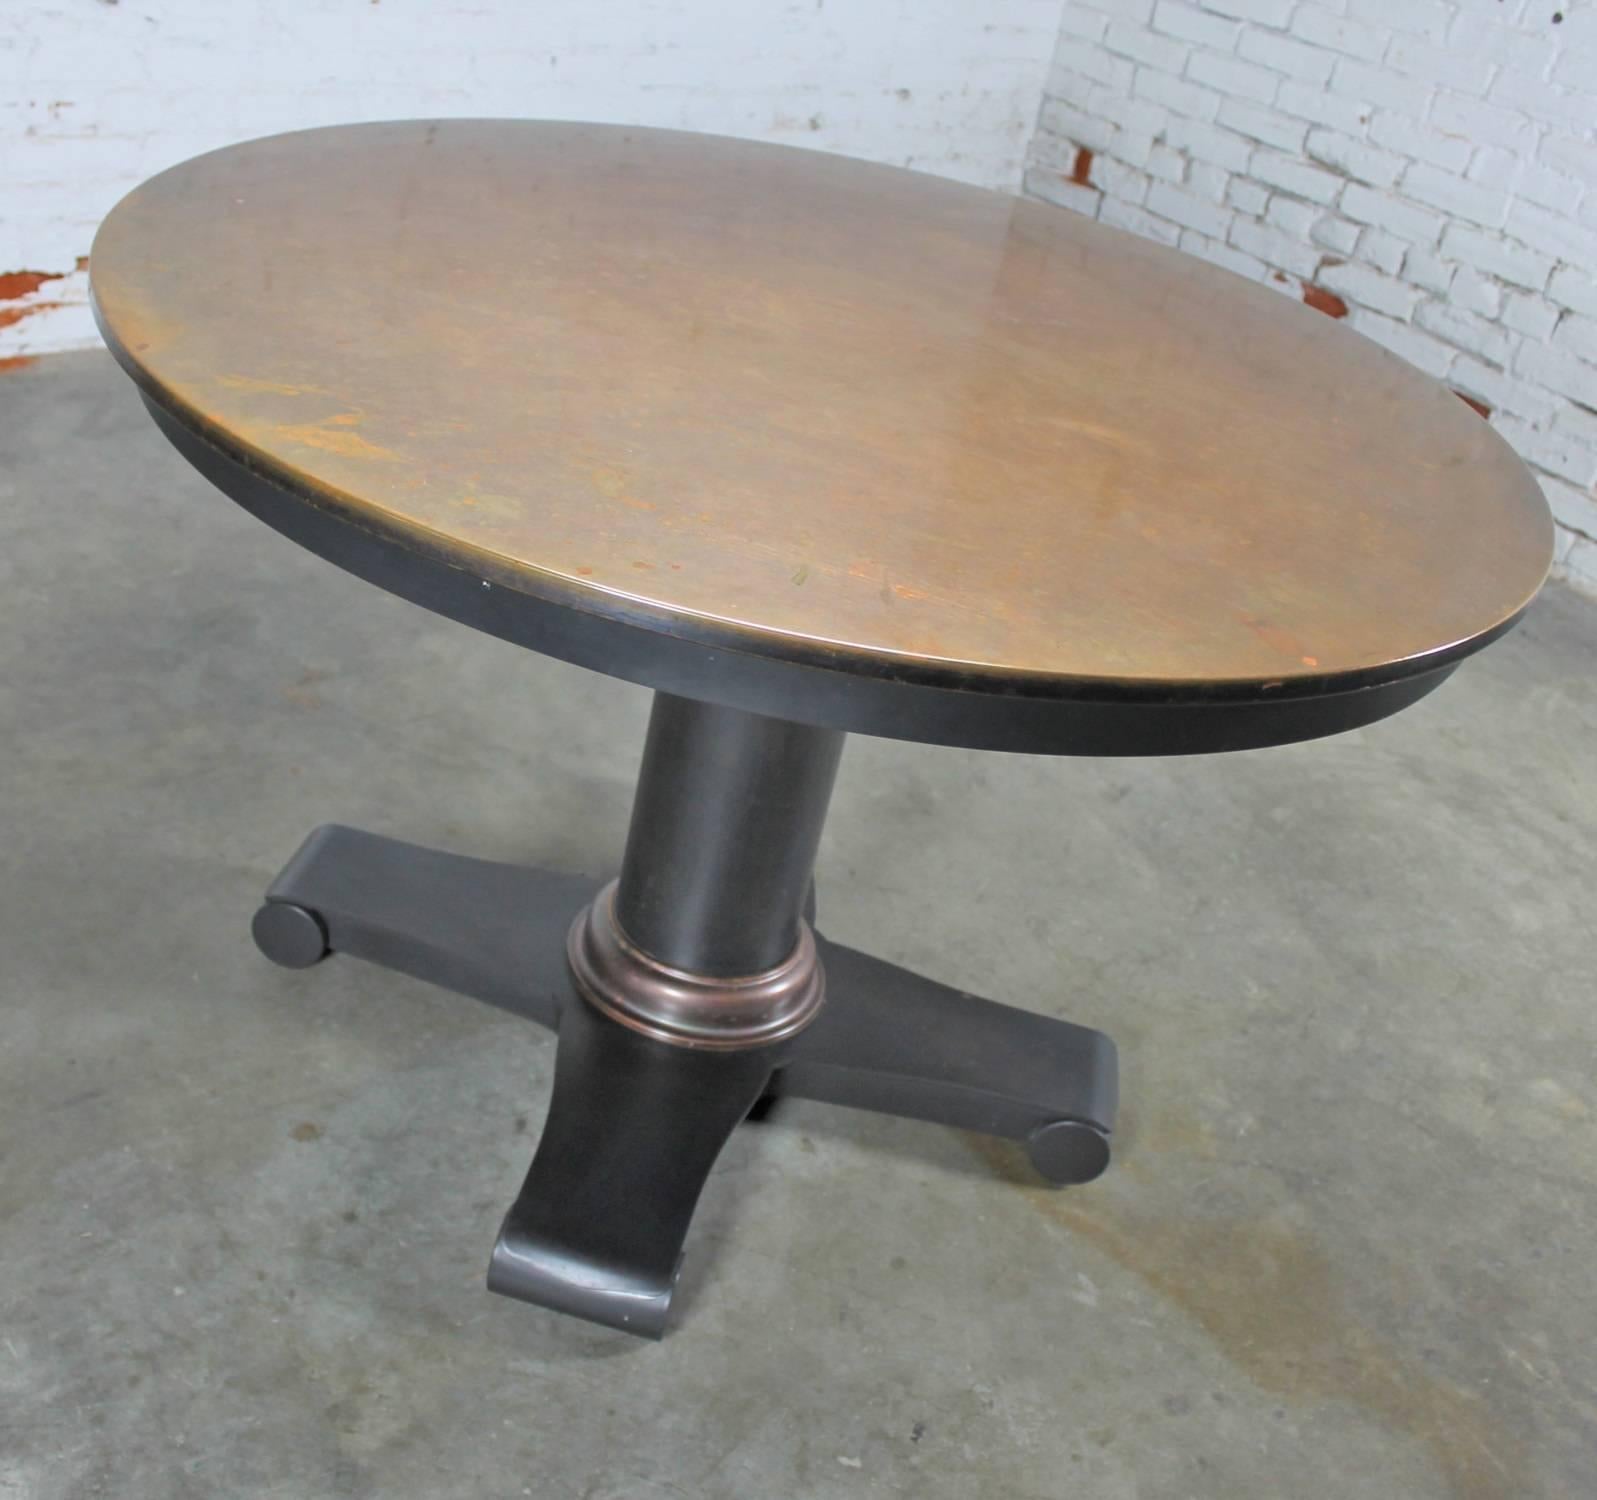 Interesting and handsome smaller round dining table or centre table with beautiful patinated copper top and steel column pedestal base. It is in great condition with lots of interesting patina, circa 2000.

This attractive copper topped round